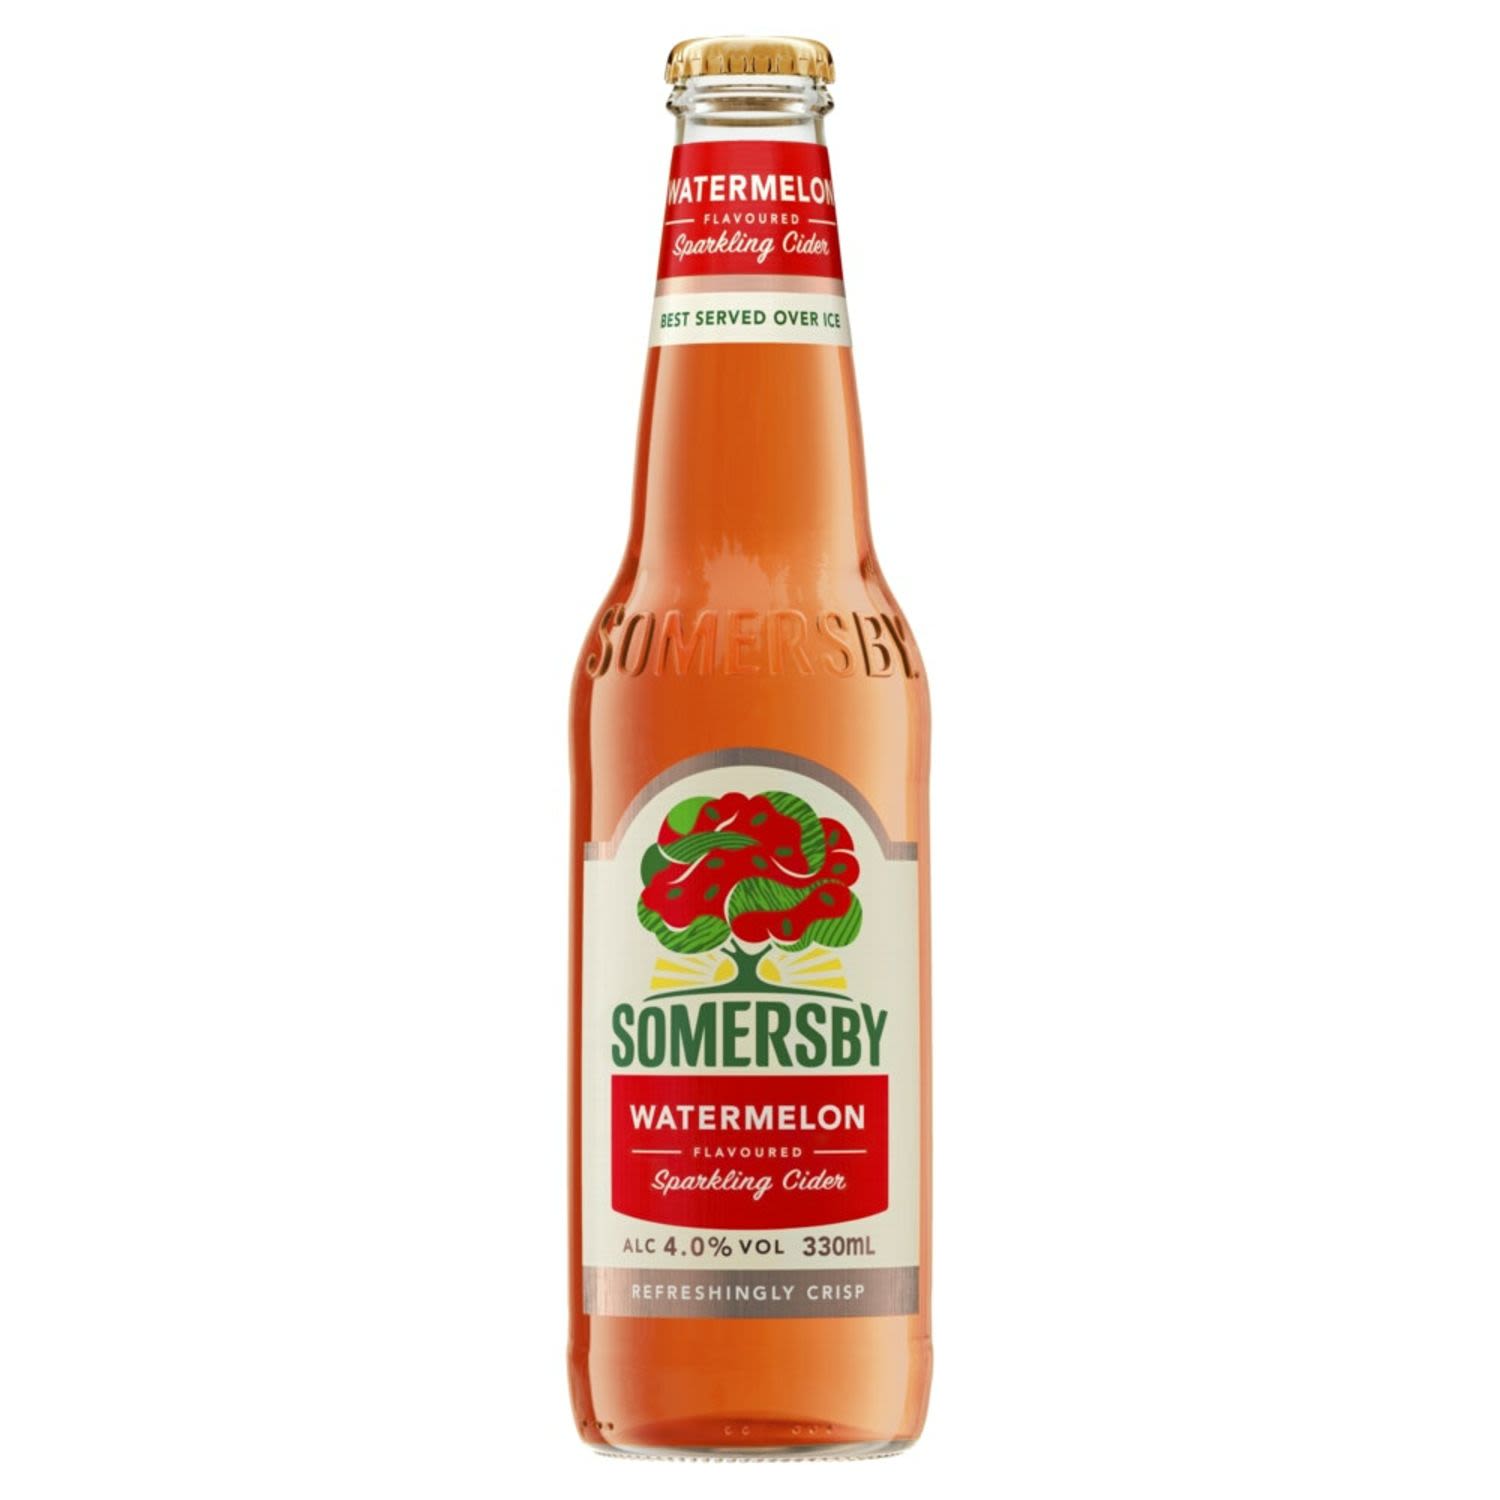 This easy to drink Somersby cider gives you a refreshing and fruity taste so you feel it's summer right away. Best served over ice...Enjoy!<br /> <br />Alcohol Volume: 4.00%<br /><br />Pack Format: Bottle<br /><br />Standard Drinks: 1</br /><br />Pack Type: Bottle<br /><br />Country of Origin: Australia<br />